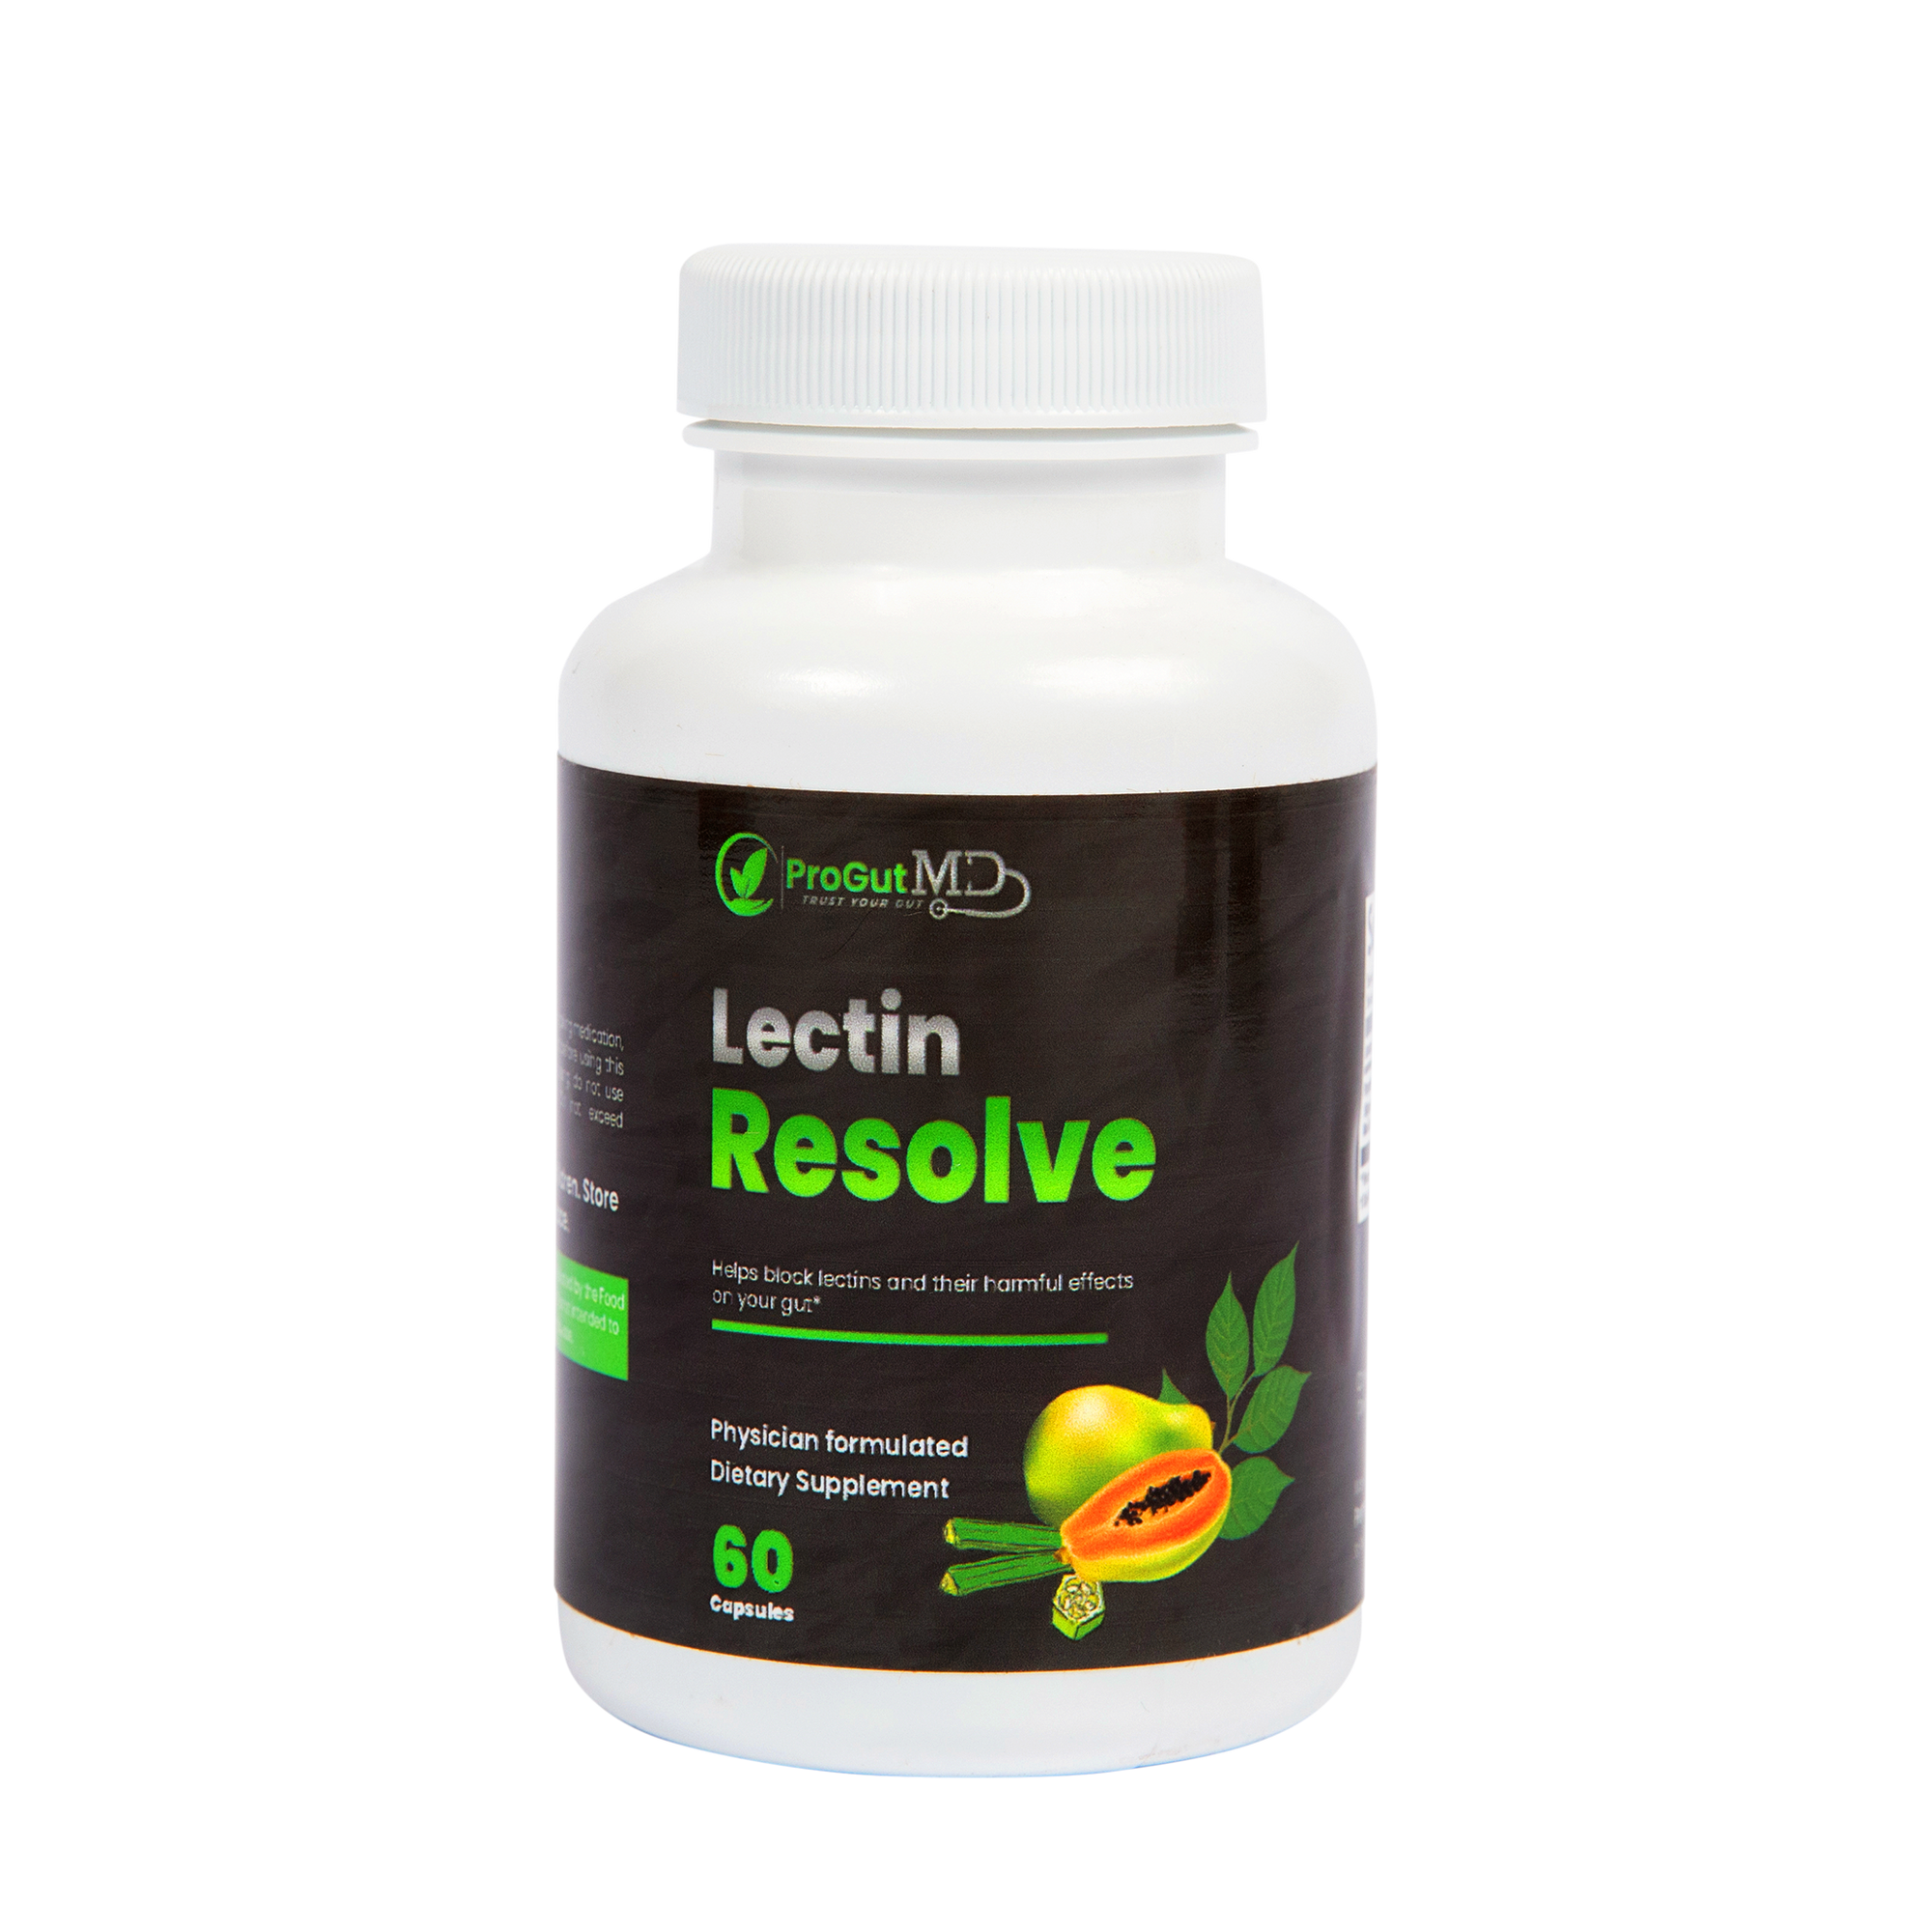 A bottle of Lectin Resolve